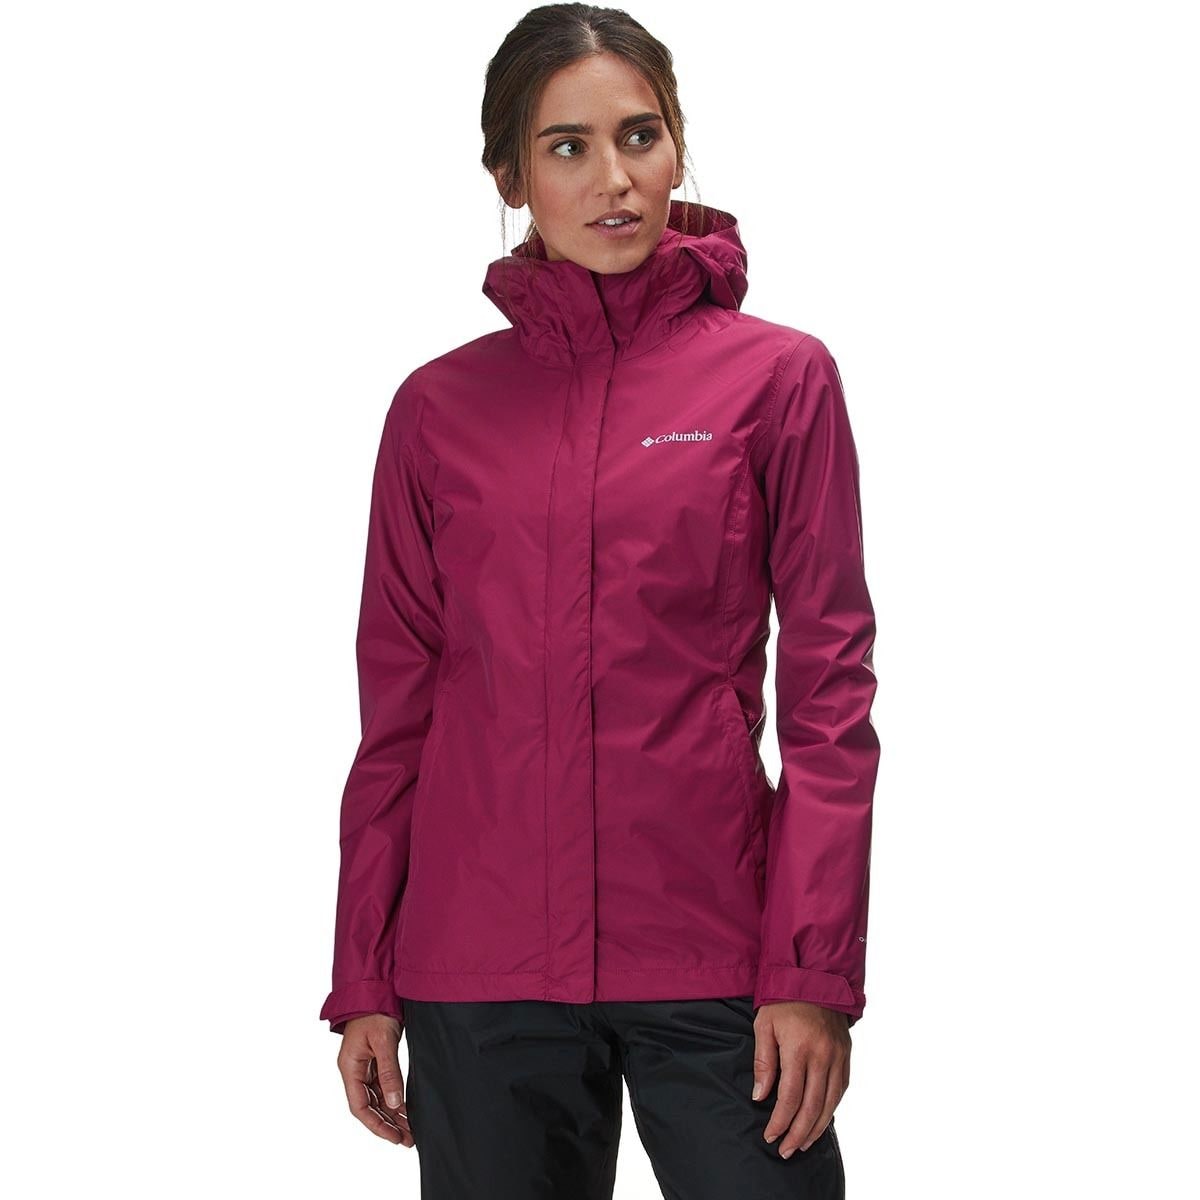 Columbia - Women's Jackets, Coats, Parkas. Sustainable fashion and apparel.